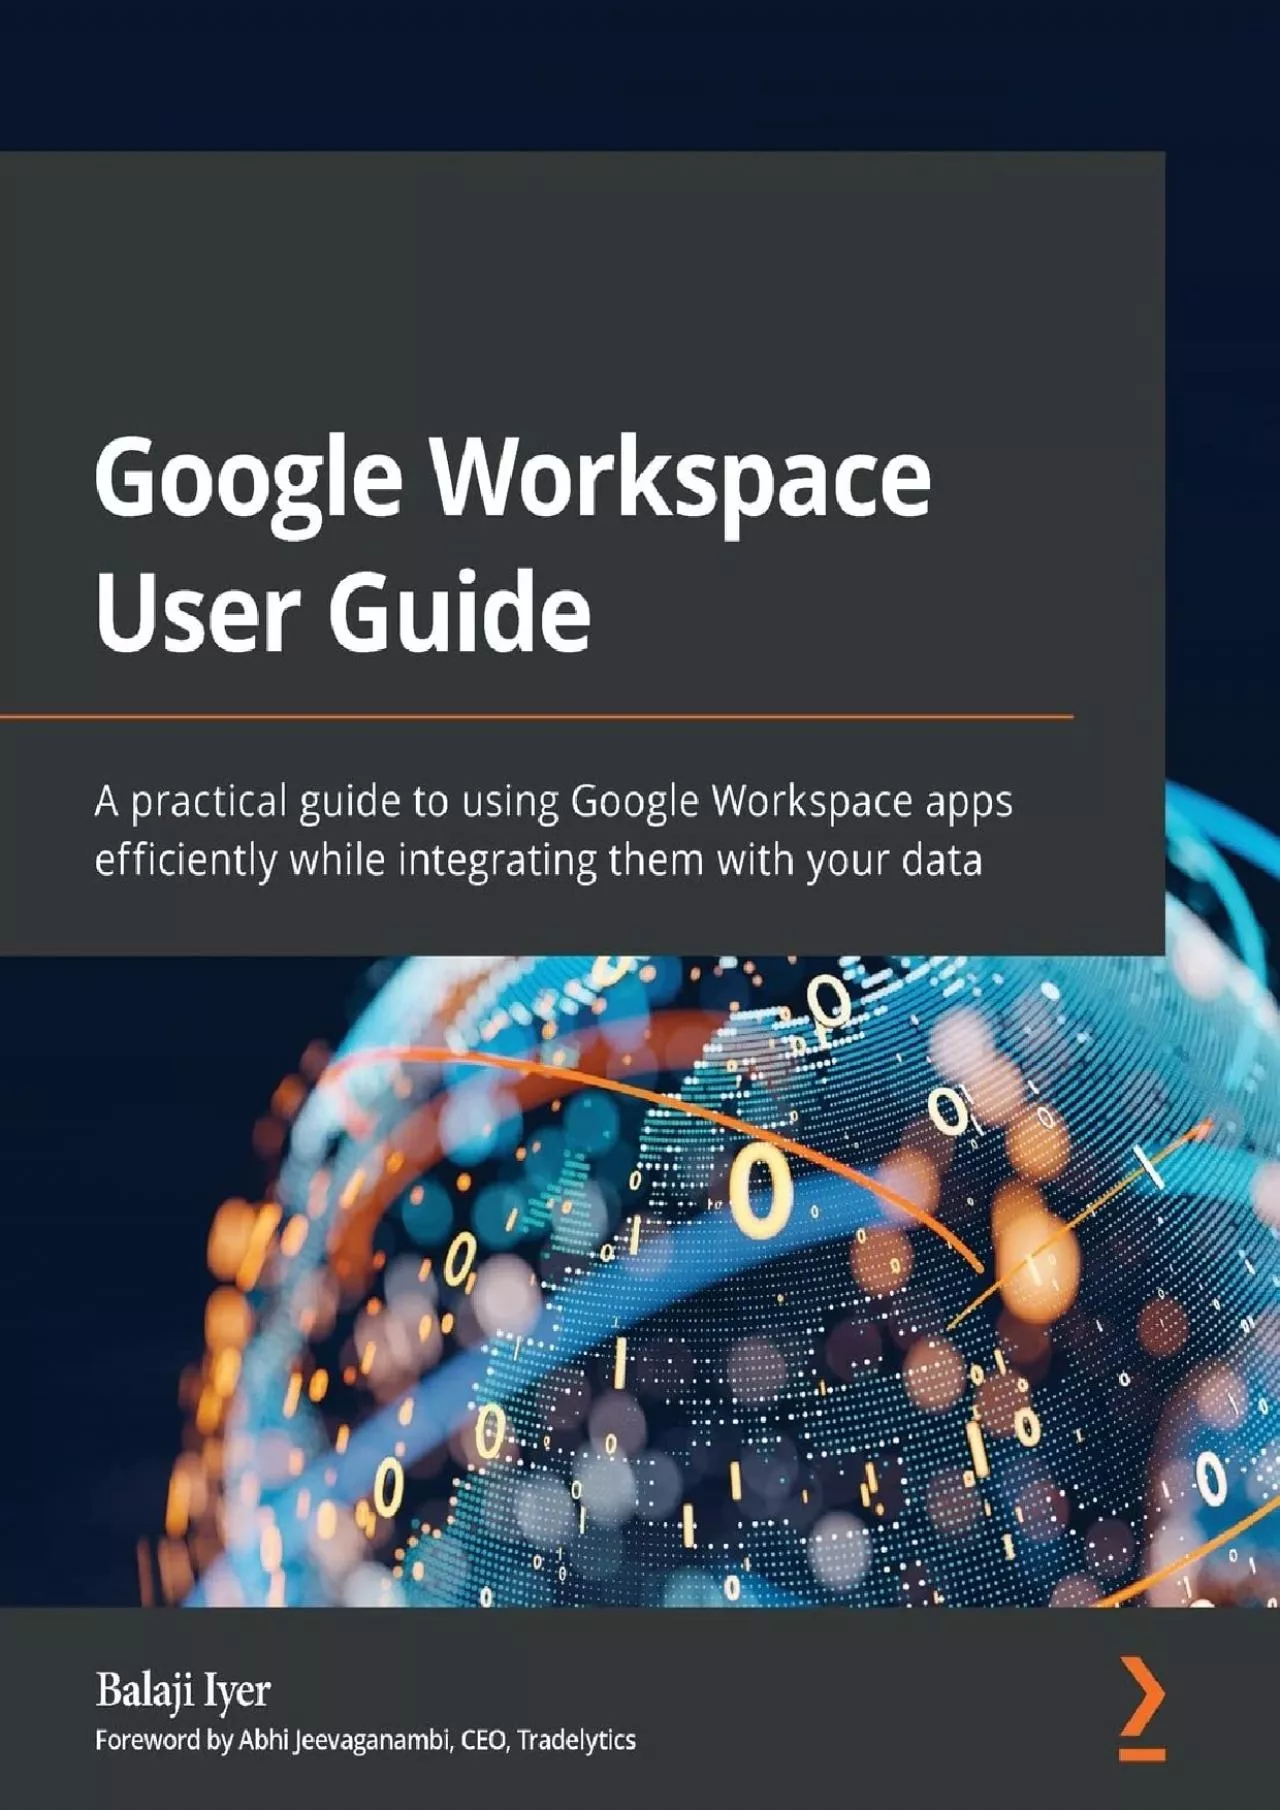 Google Workspace User Guide: A practical guide to using Google Workspace apps efficiently